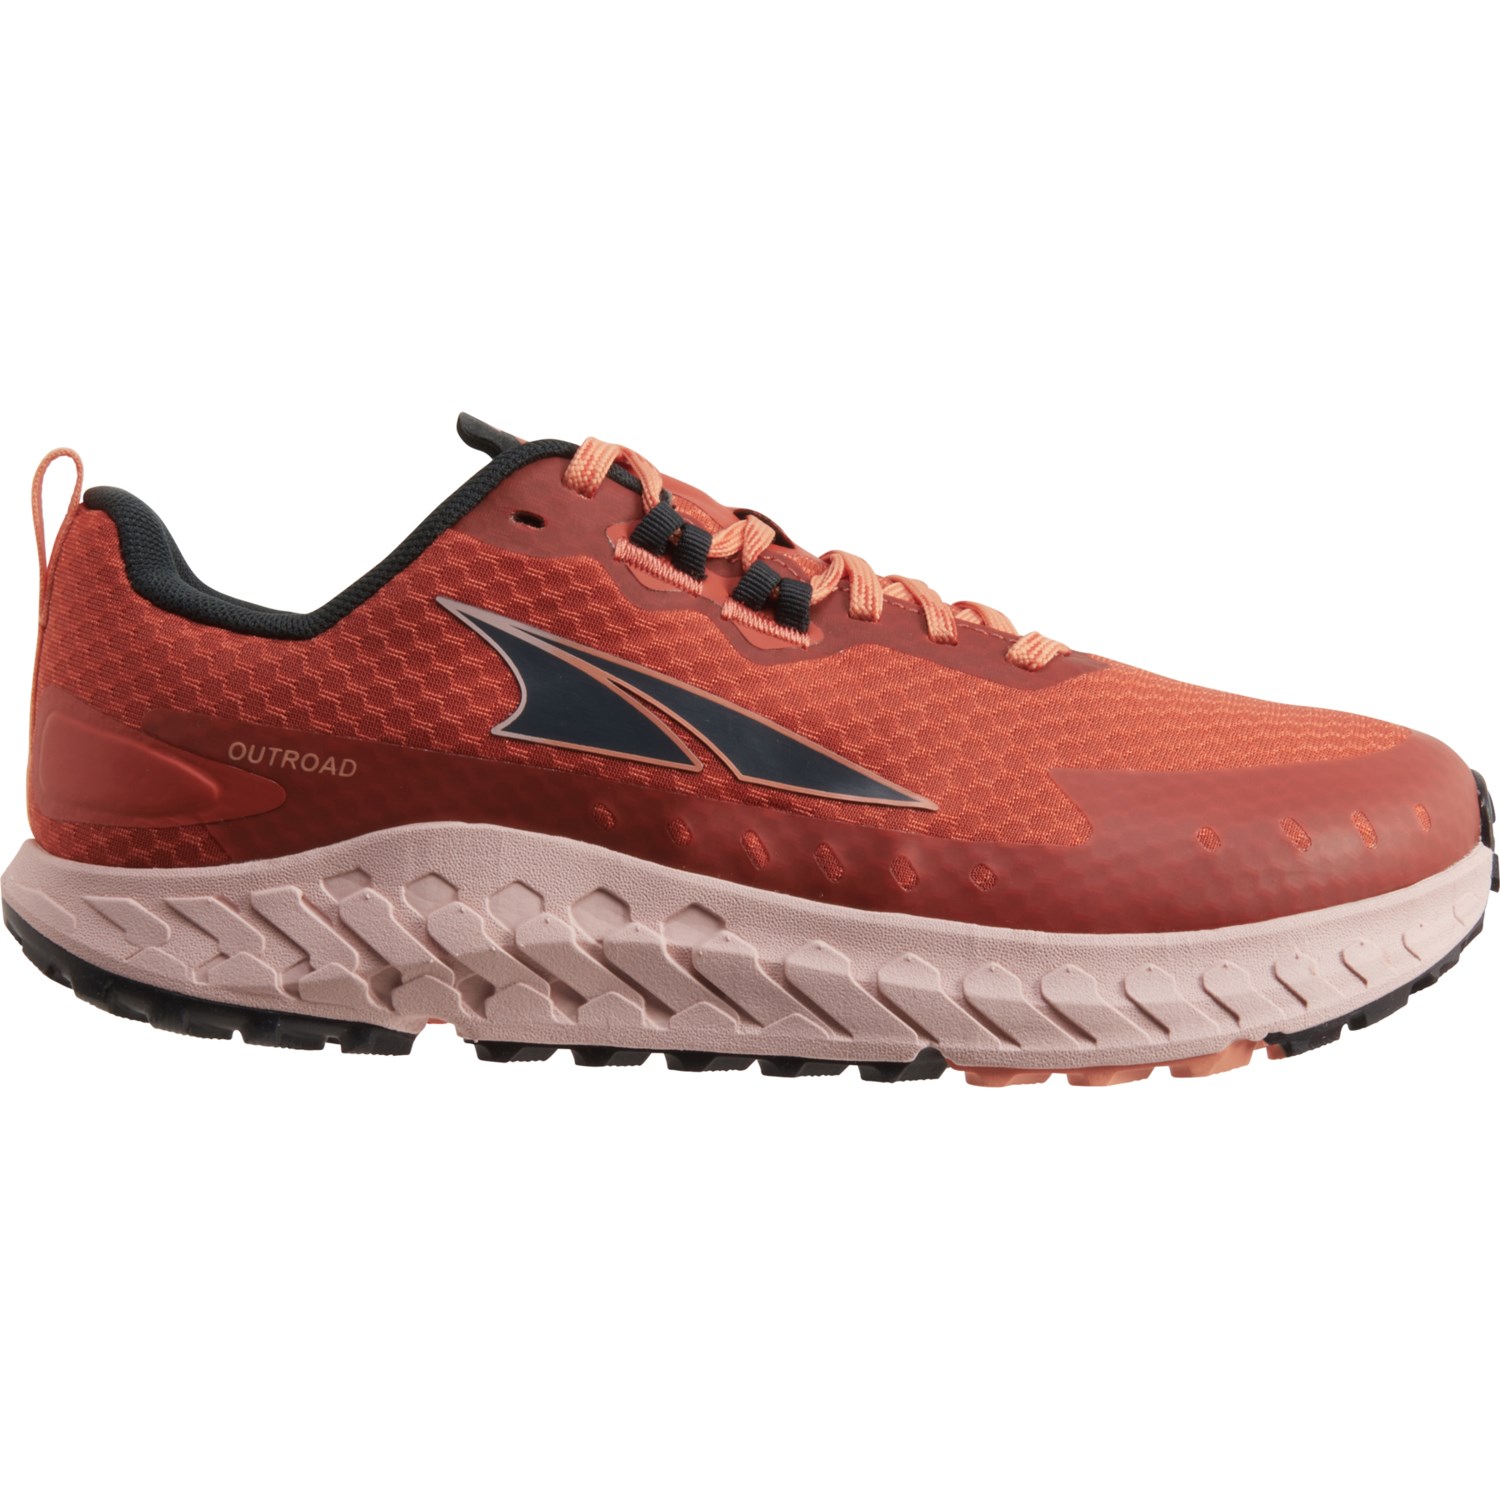 Altra Outroad Running Shoes (For Women) - Save 40%